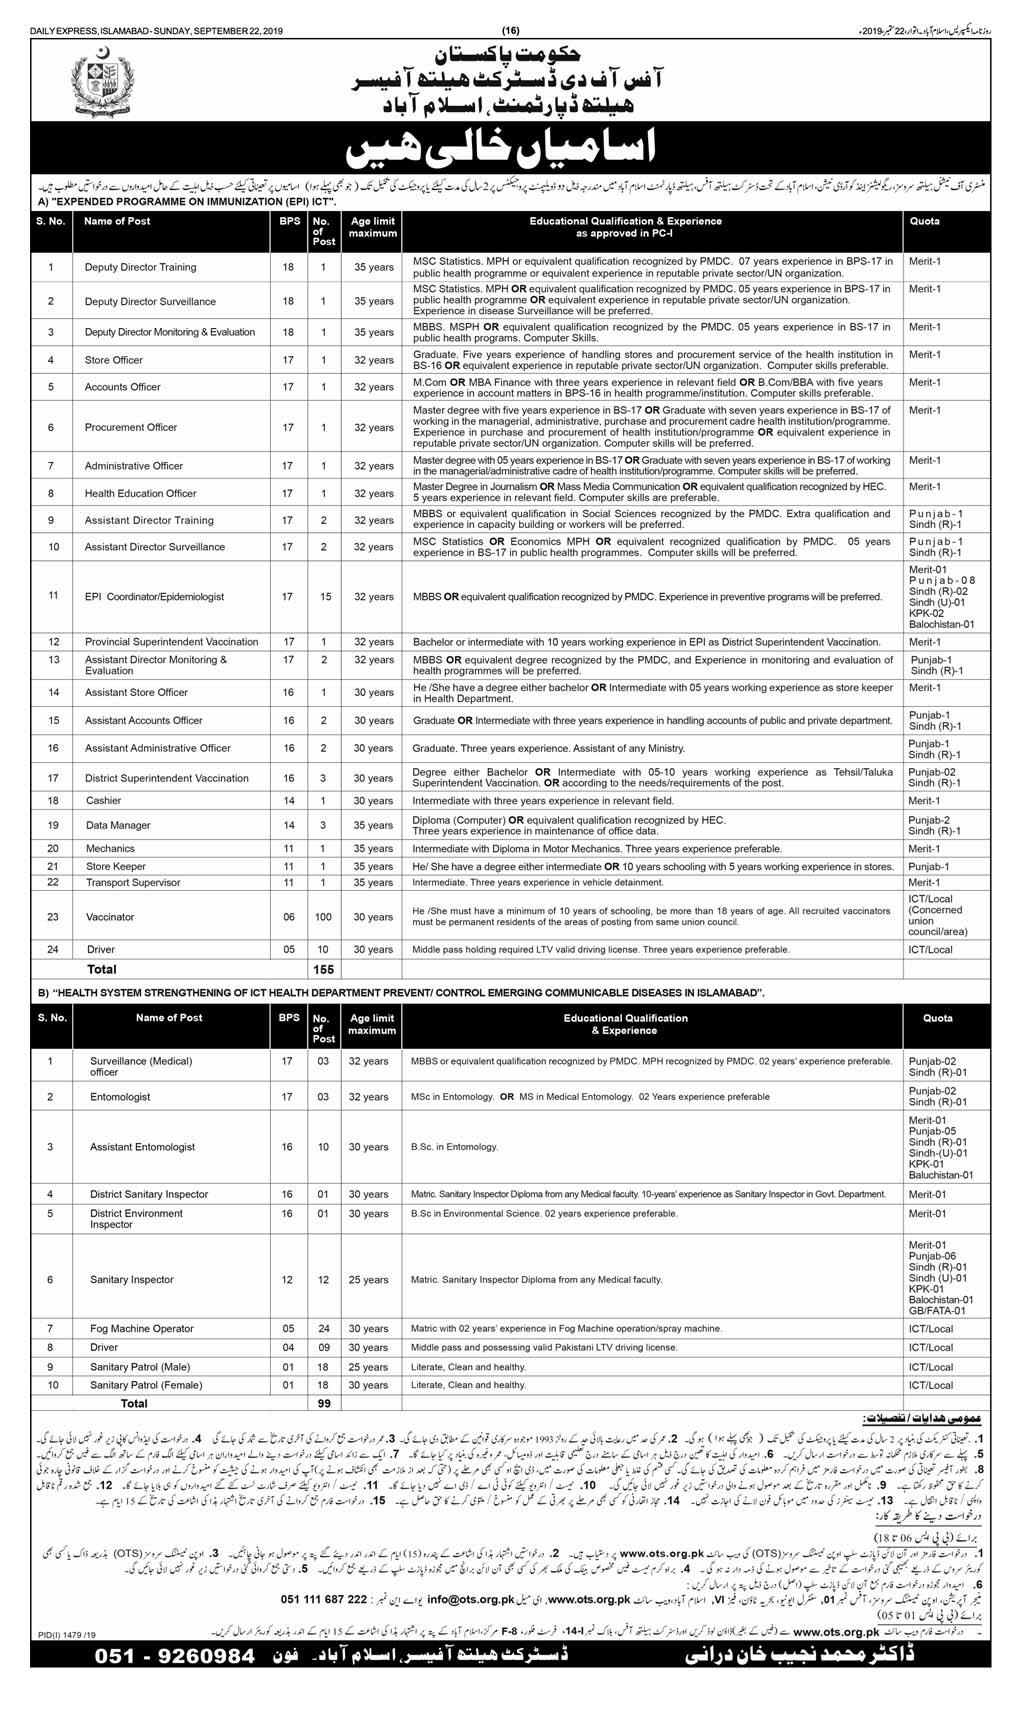 District Health Officer DHO Office Islamabad Jobs OTS Test Result